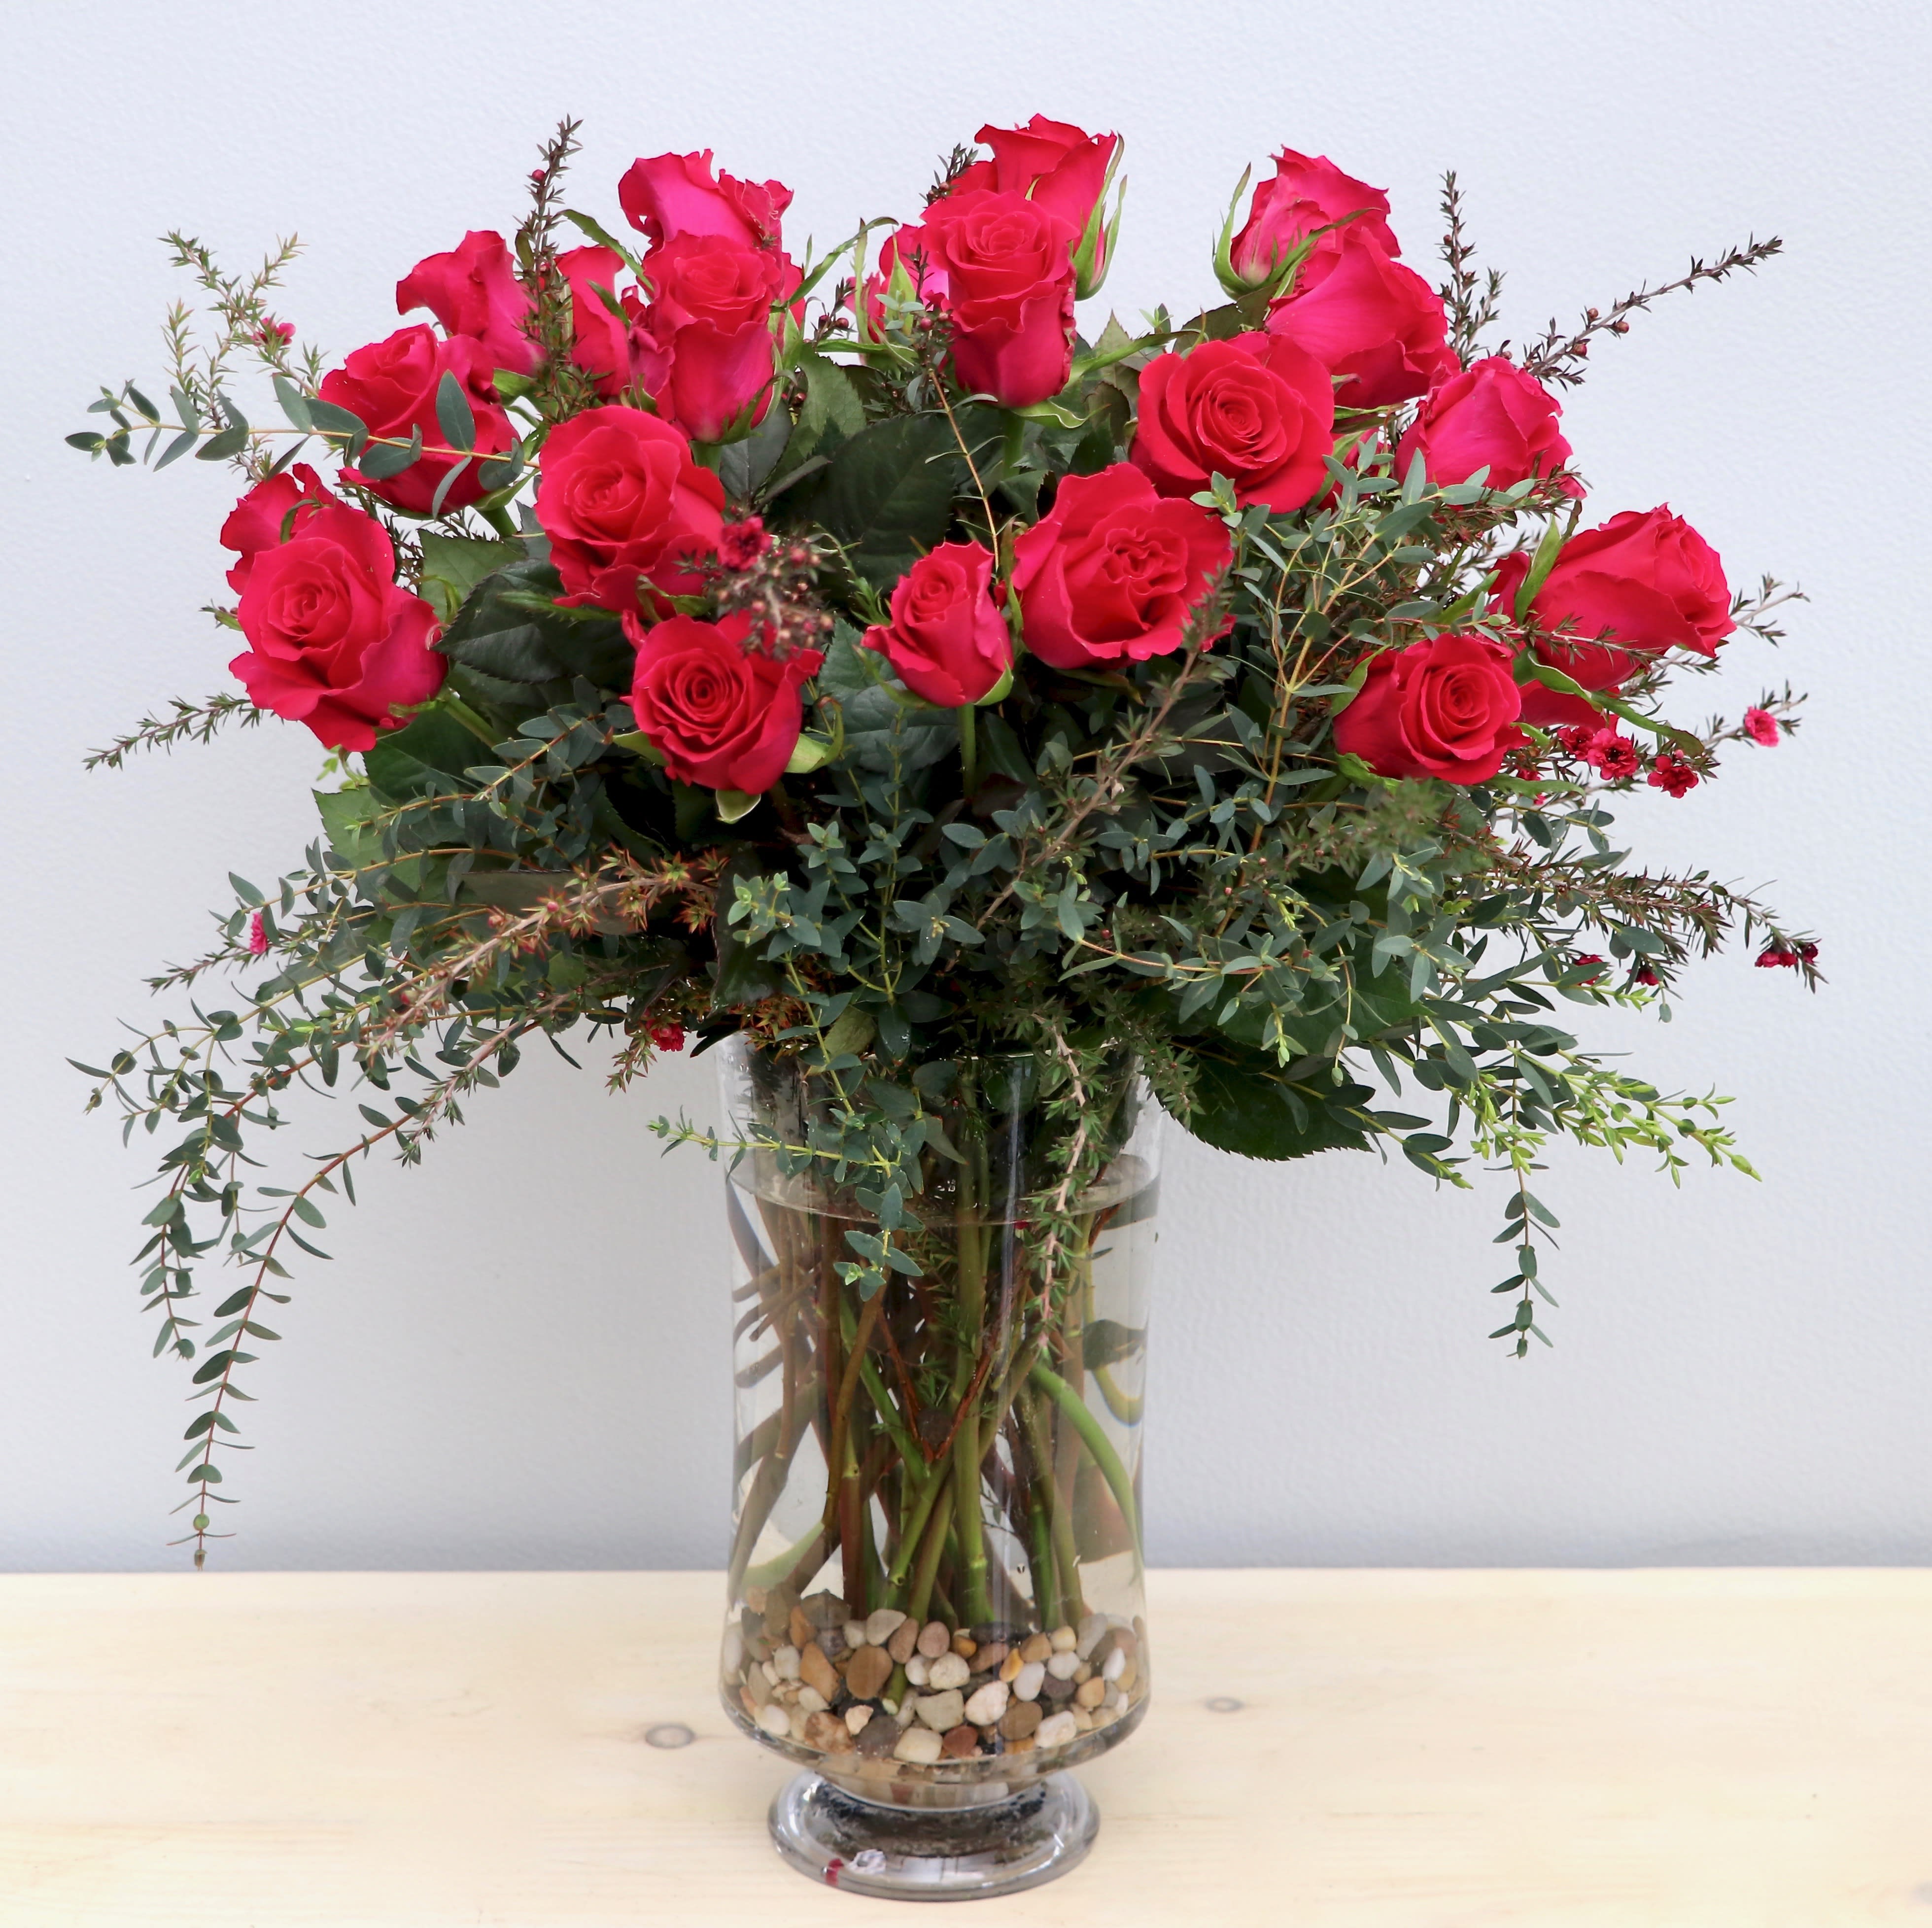 Pink Lady  - Glendale Florist - Hot pink roses make this arrangement the pink beauty everyone deserves.  Standard has  24 roses. Deluxe has 50 roses. Premium has 100 roses. 